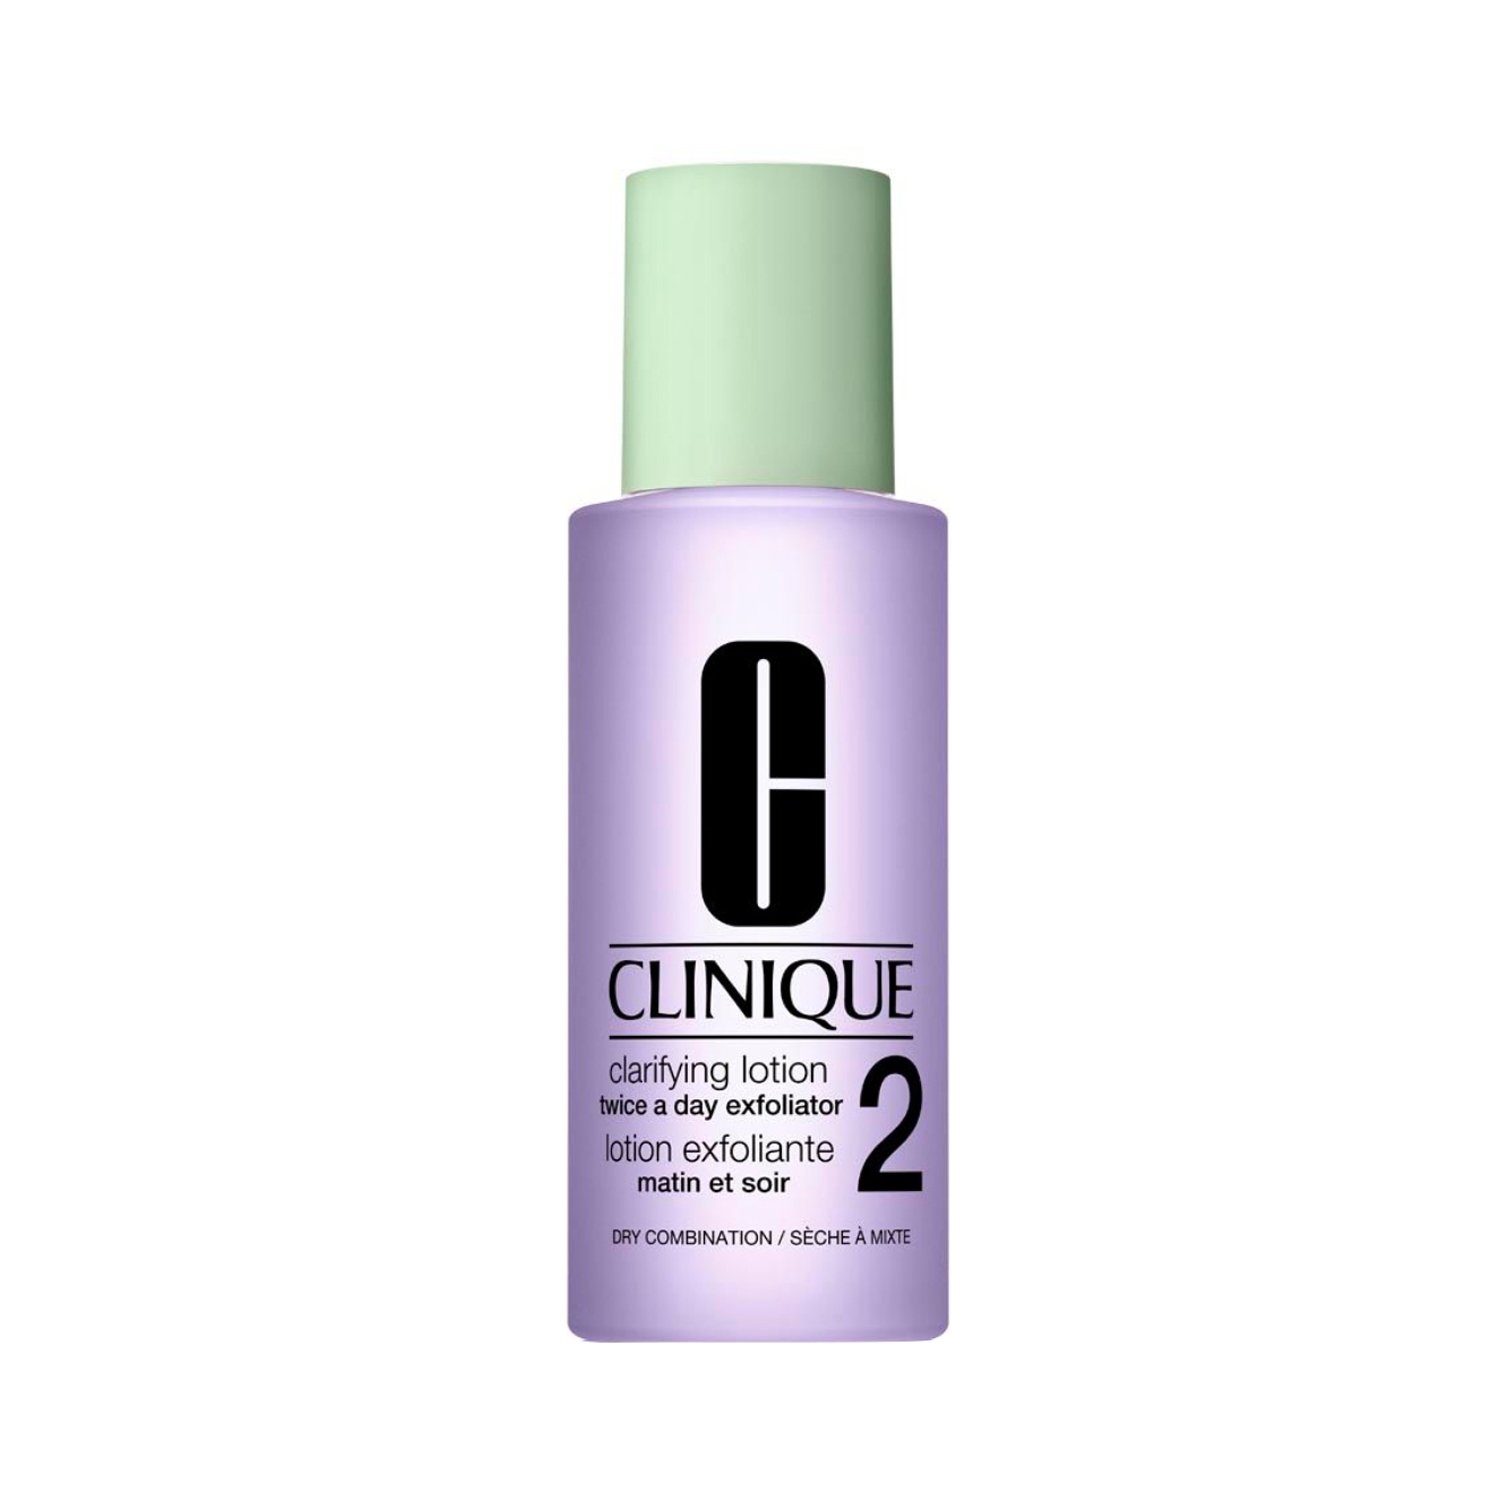 CLINIQUE | CLINIQUE Clarifying Lotion Twice A Day Exfoliator 2 (60ml)